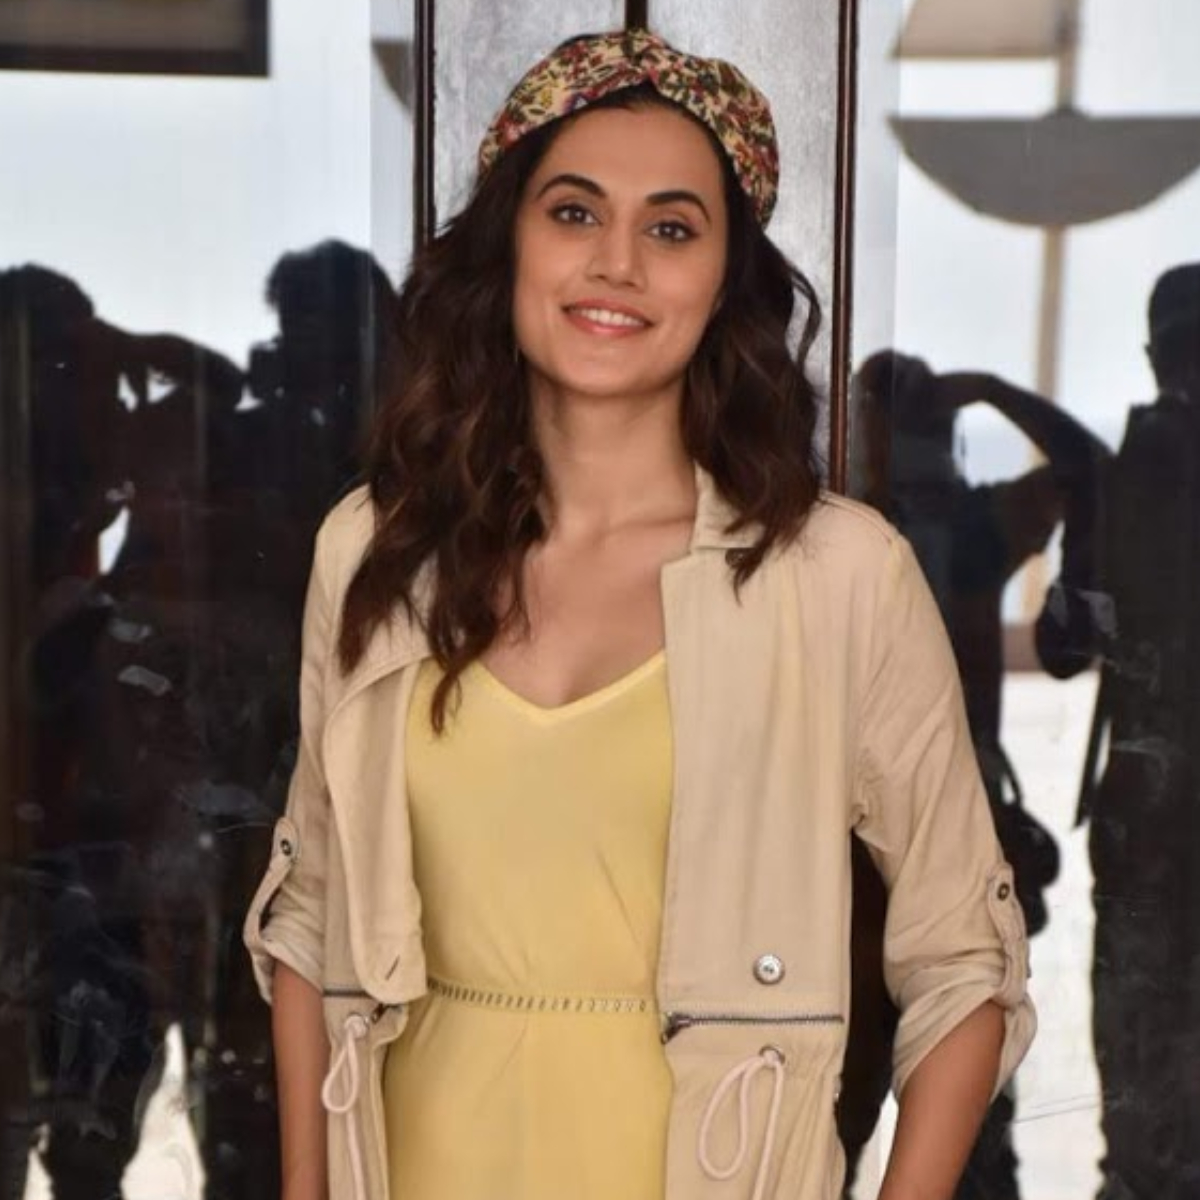 EXCLUSIVE: Taapsee Pannu to shoot for Shabaash Mithu from April; Here’s all you need to know about her prep